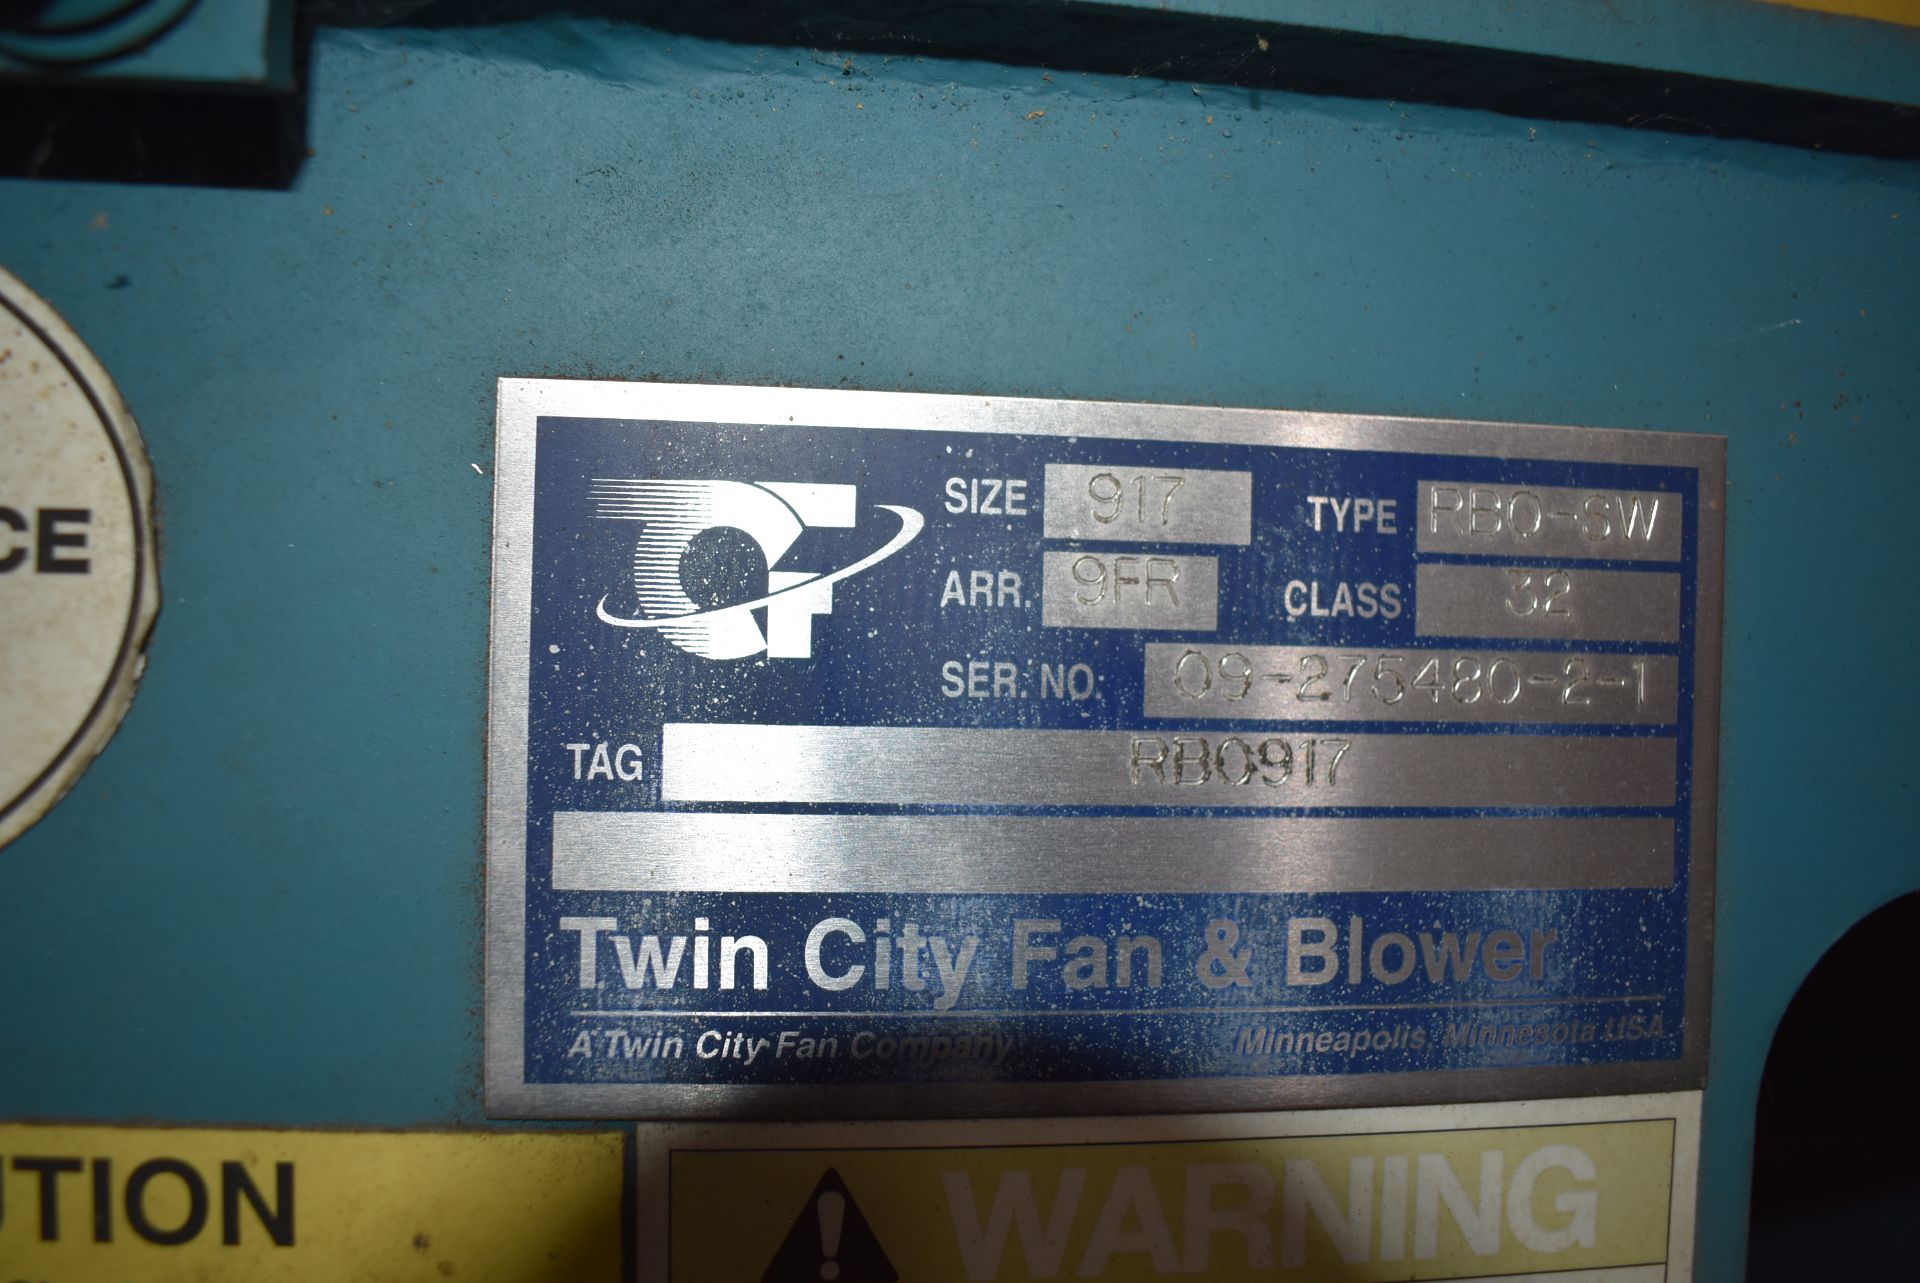 Twin City Type RBO-SW Blower, Size 917 w/30 HP Motor. RIGGING/LOADING FEE $30 - Image 2 of 3